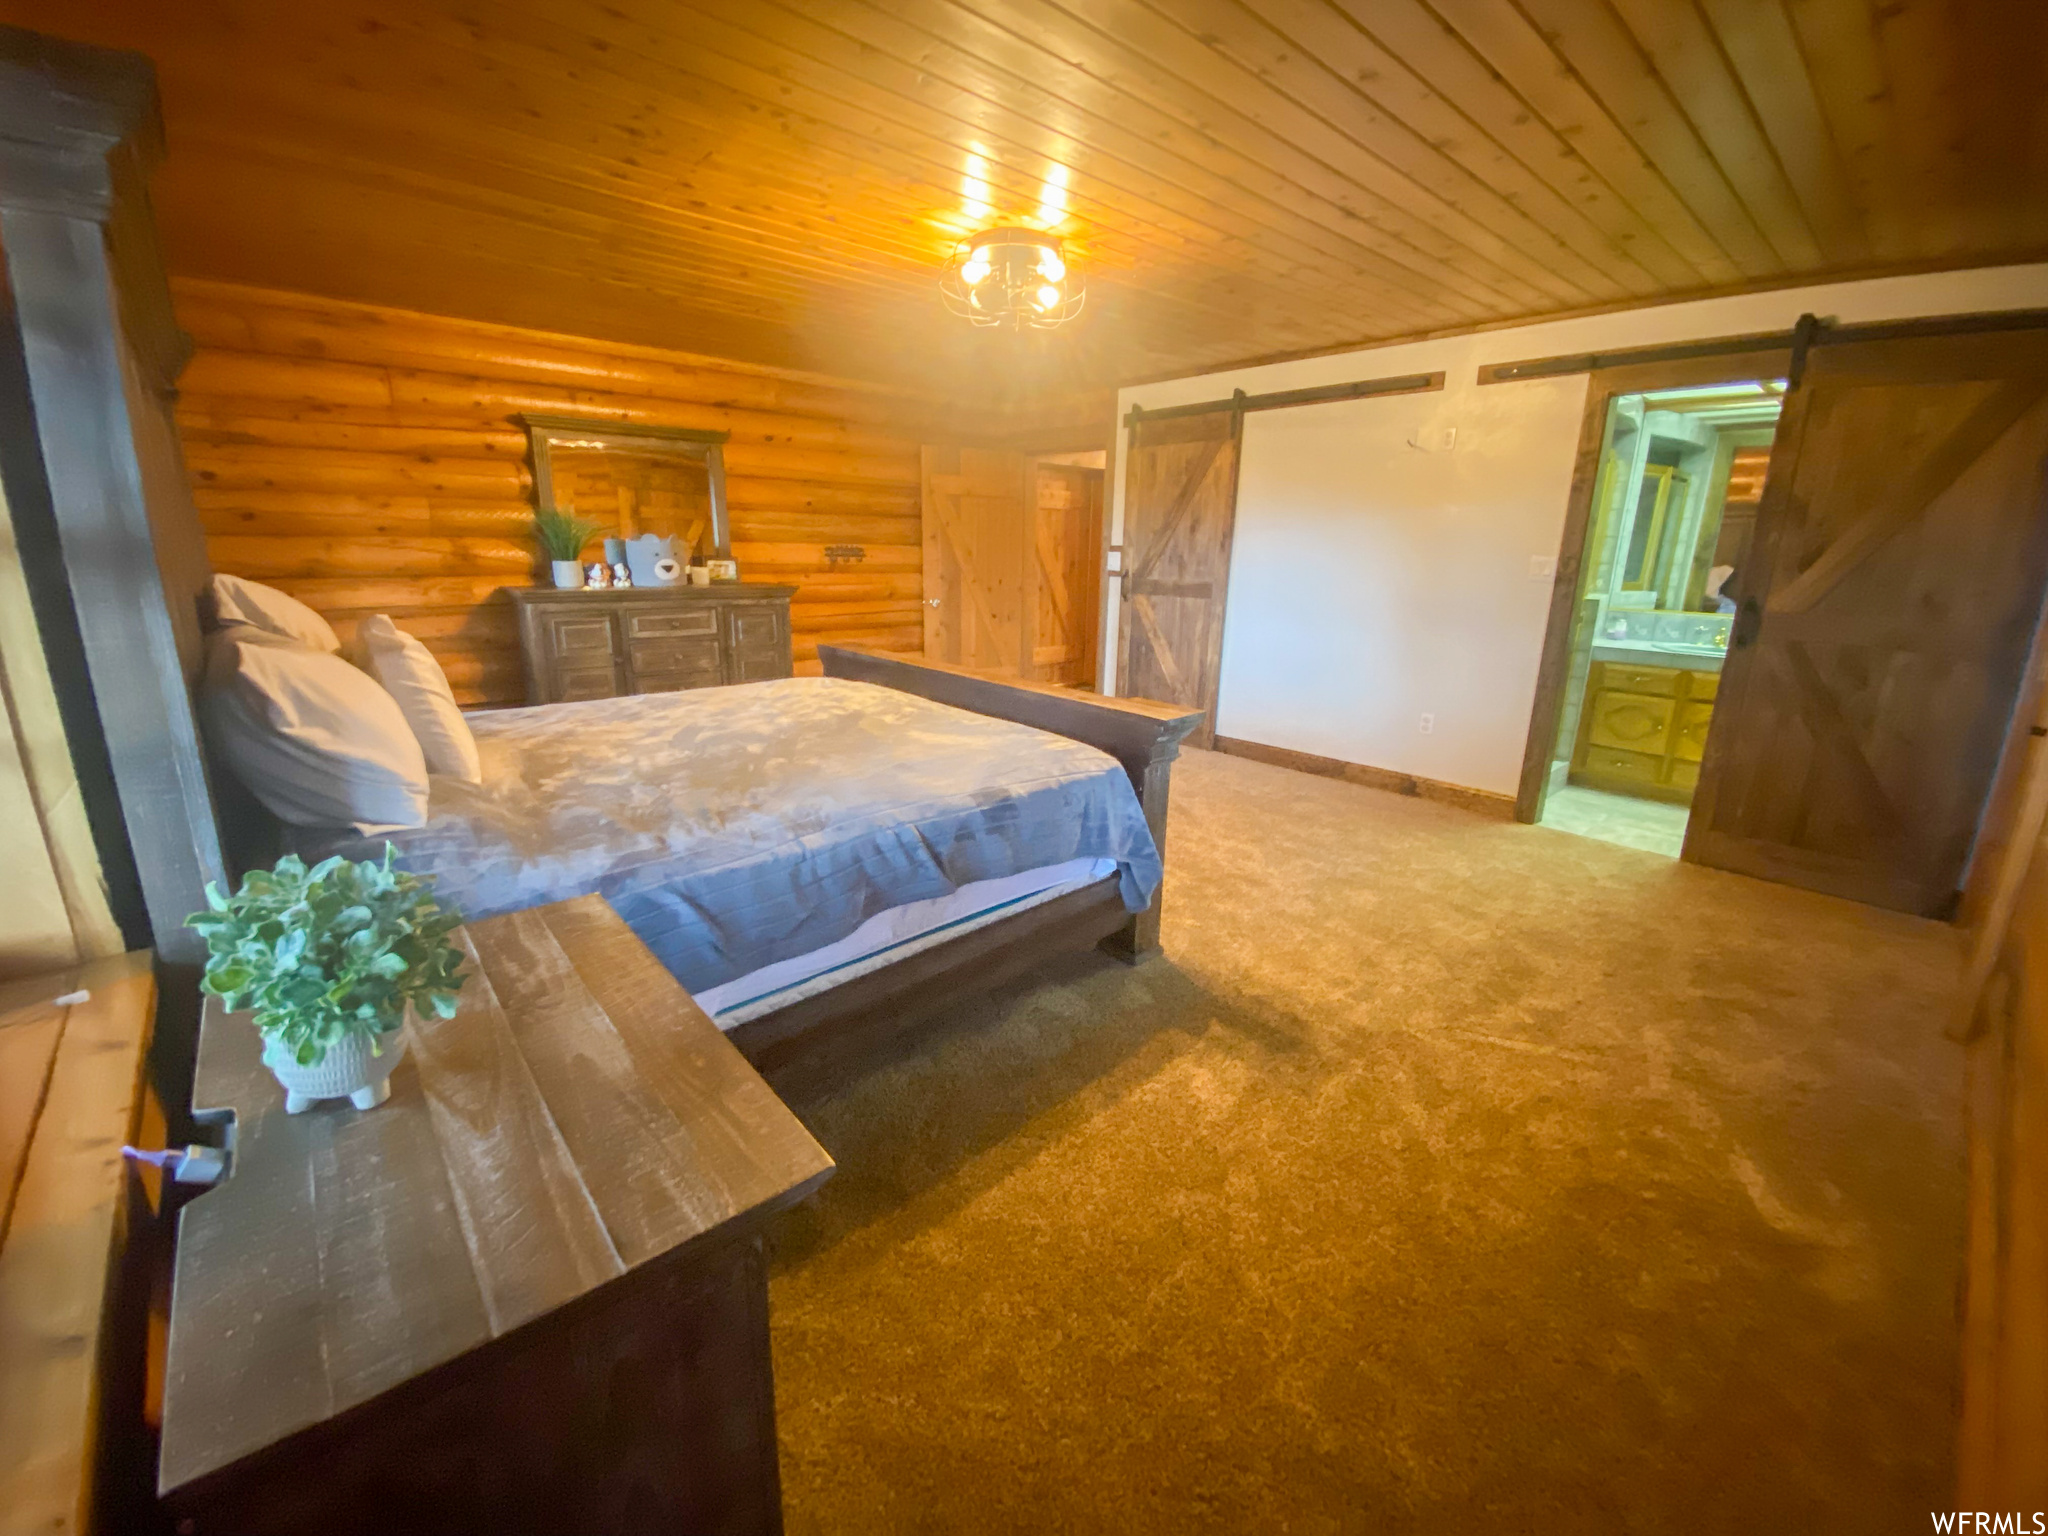 Carpeted bedroom featuring log walls, a barn door, connected bathroom, and wooden ceiling